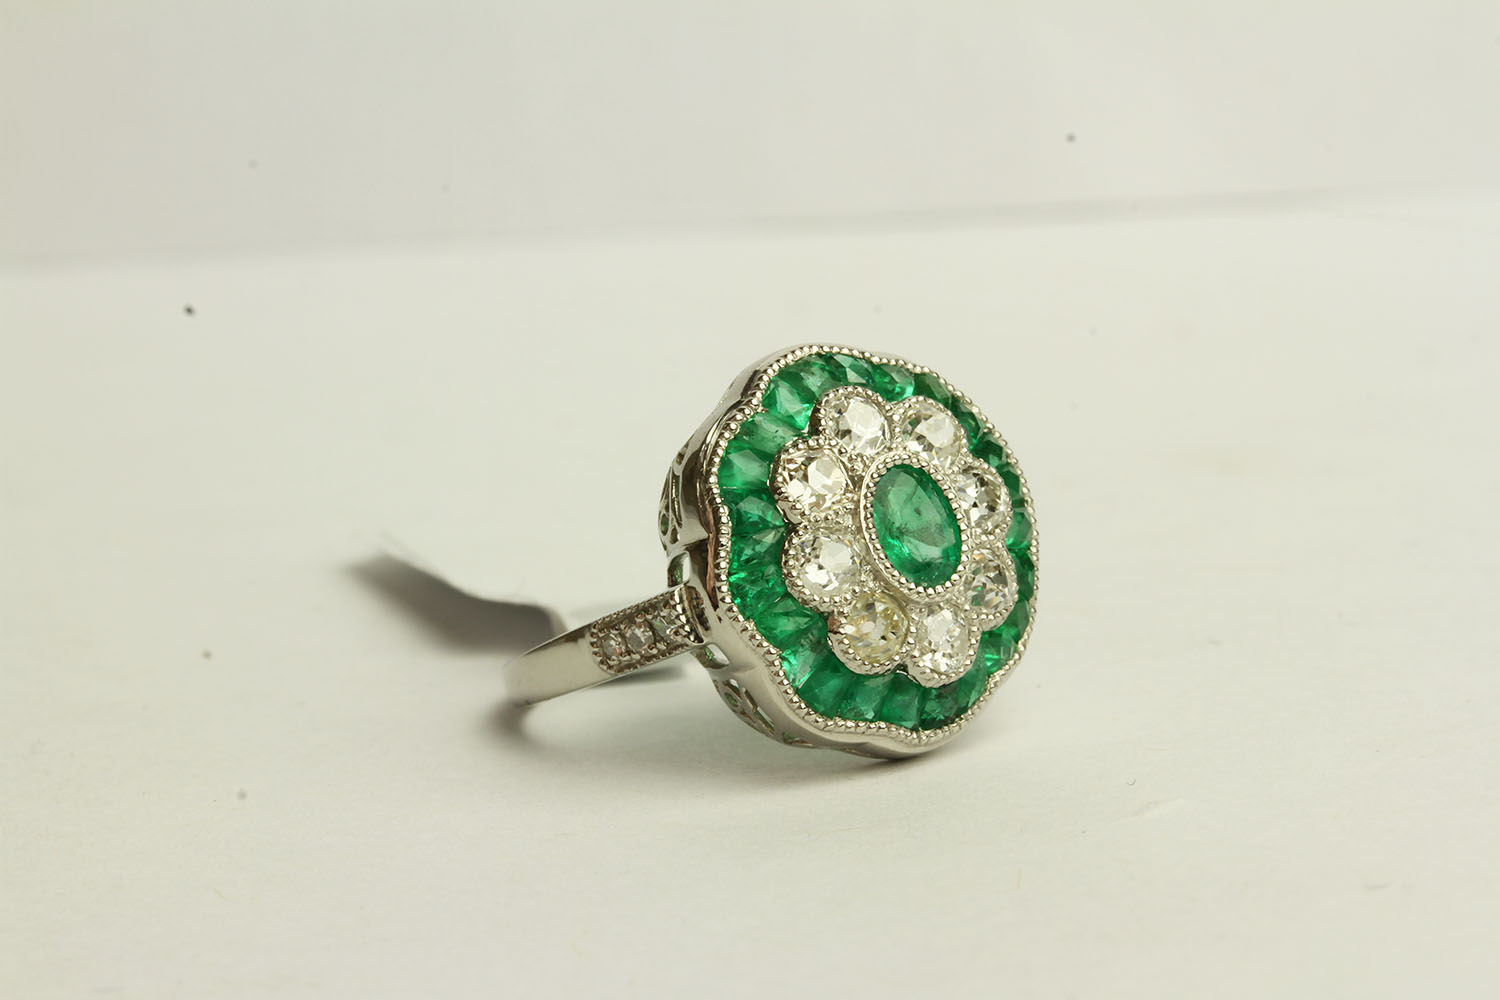 Emerald and Diamond Daisy Style Ring, set with emeralds totalling approximately 1.45ct - Image 2 of 3